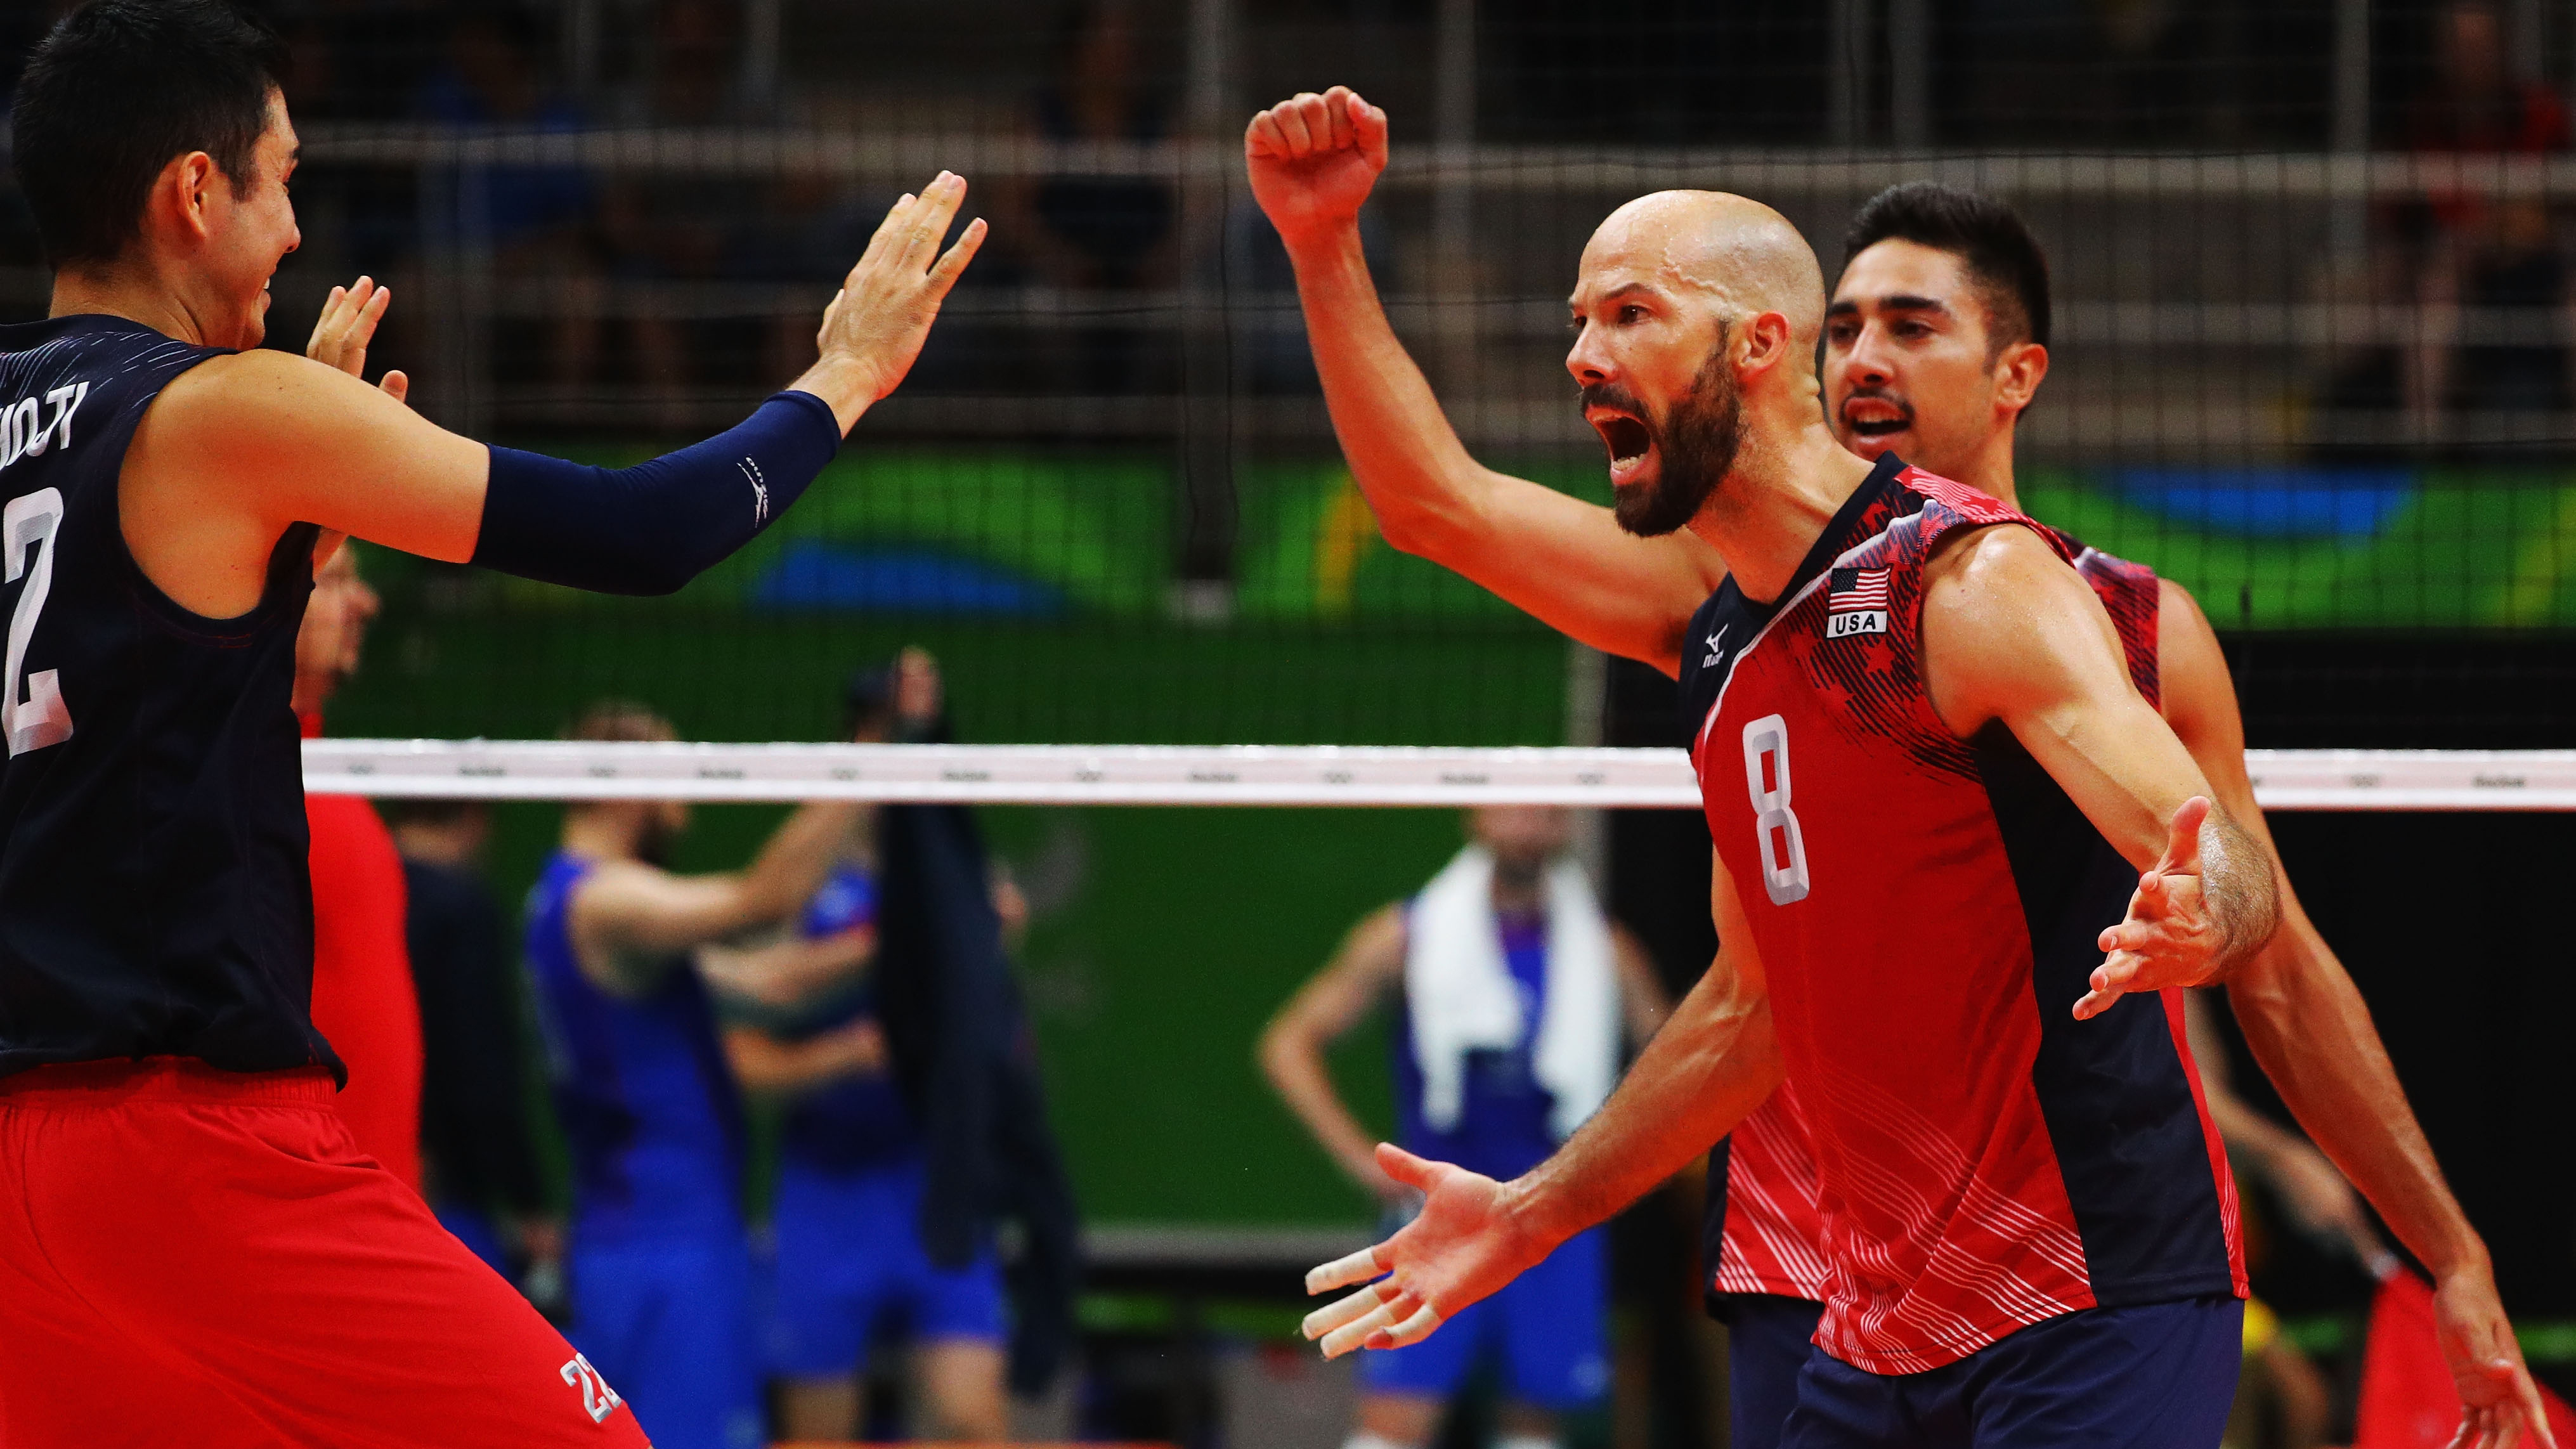 Mens volleyball comes back from 0-2 to win bronze in Rio 12news